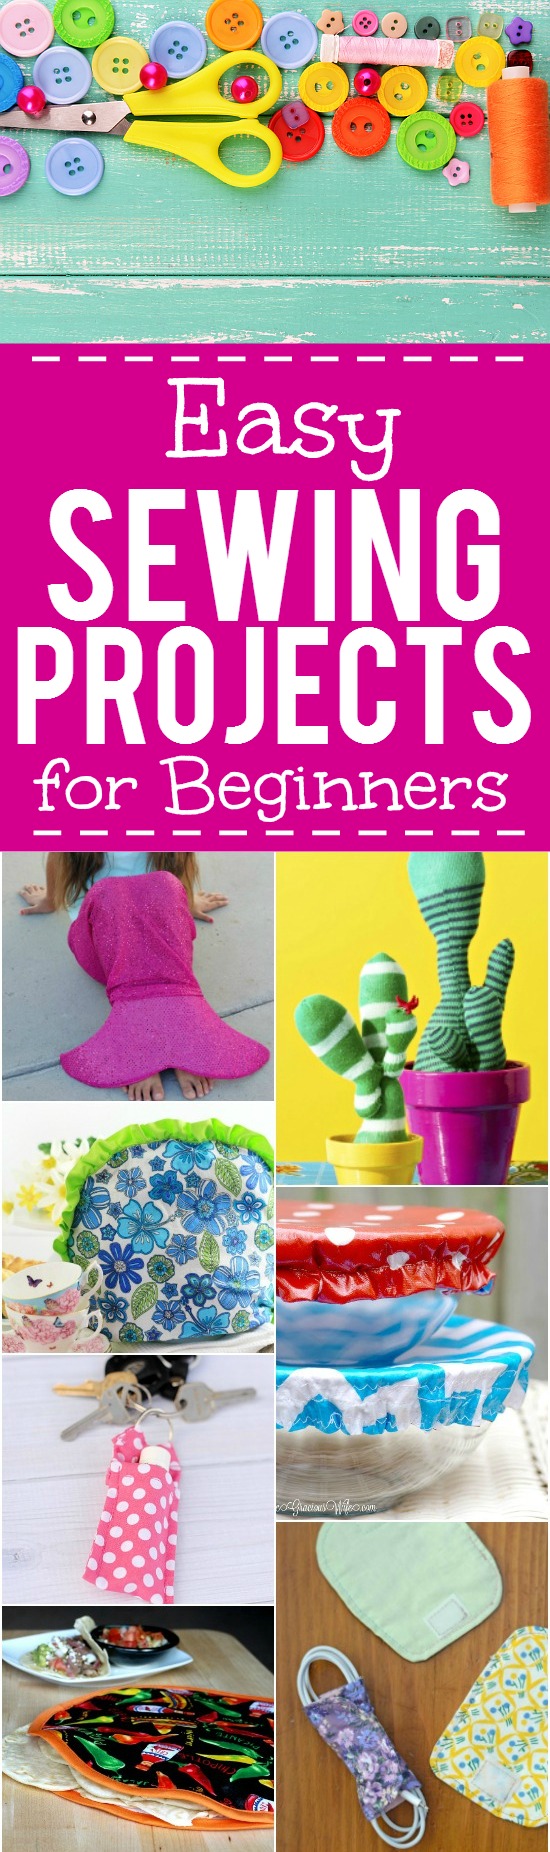 56 Quick and Easy Sewing Projects for Beginners - If you're new to sewing or just need a quick project to pass the time, try these 56 cute, fun, and EASY sewing projects that are perfect for beginners. Get started with these easy sewing tutorials and be done in no time. These are super cute!